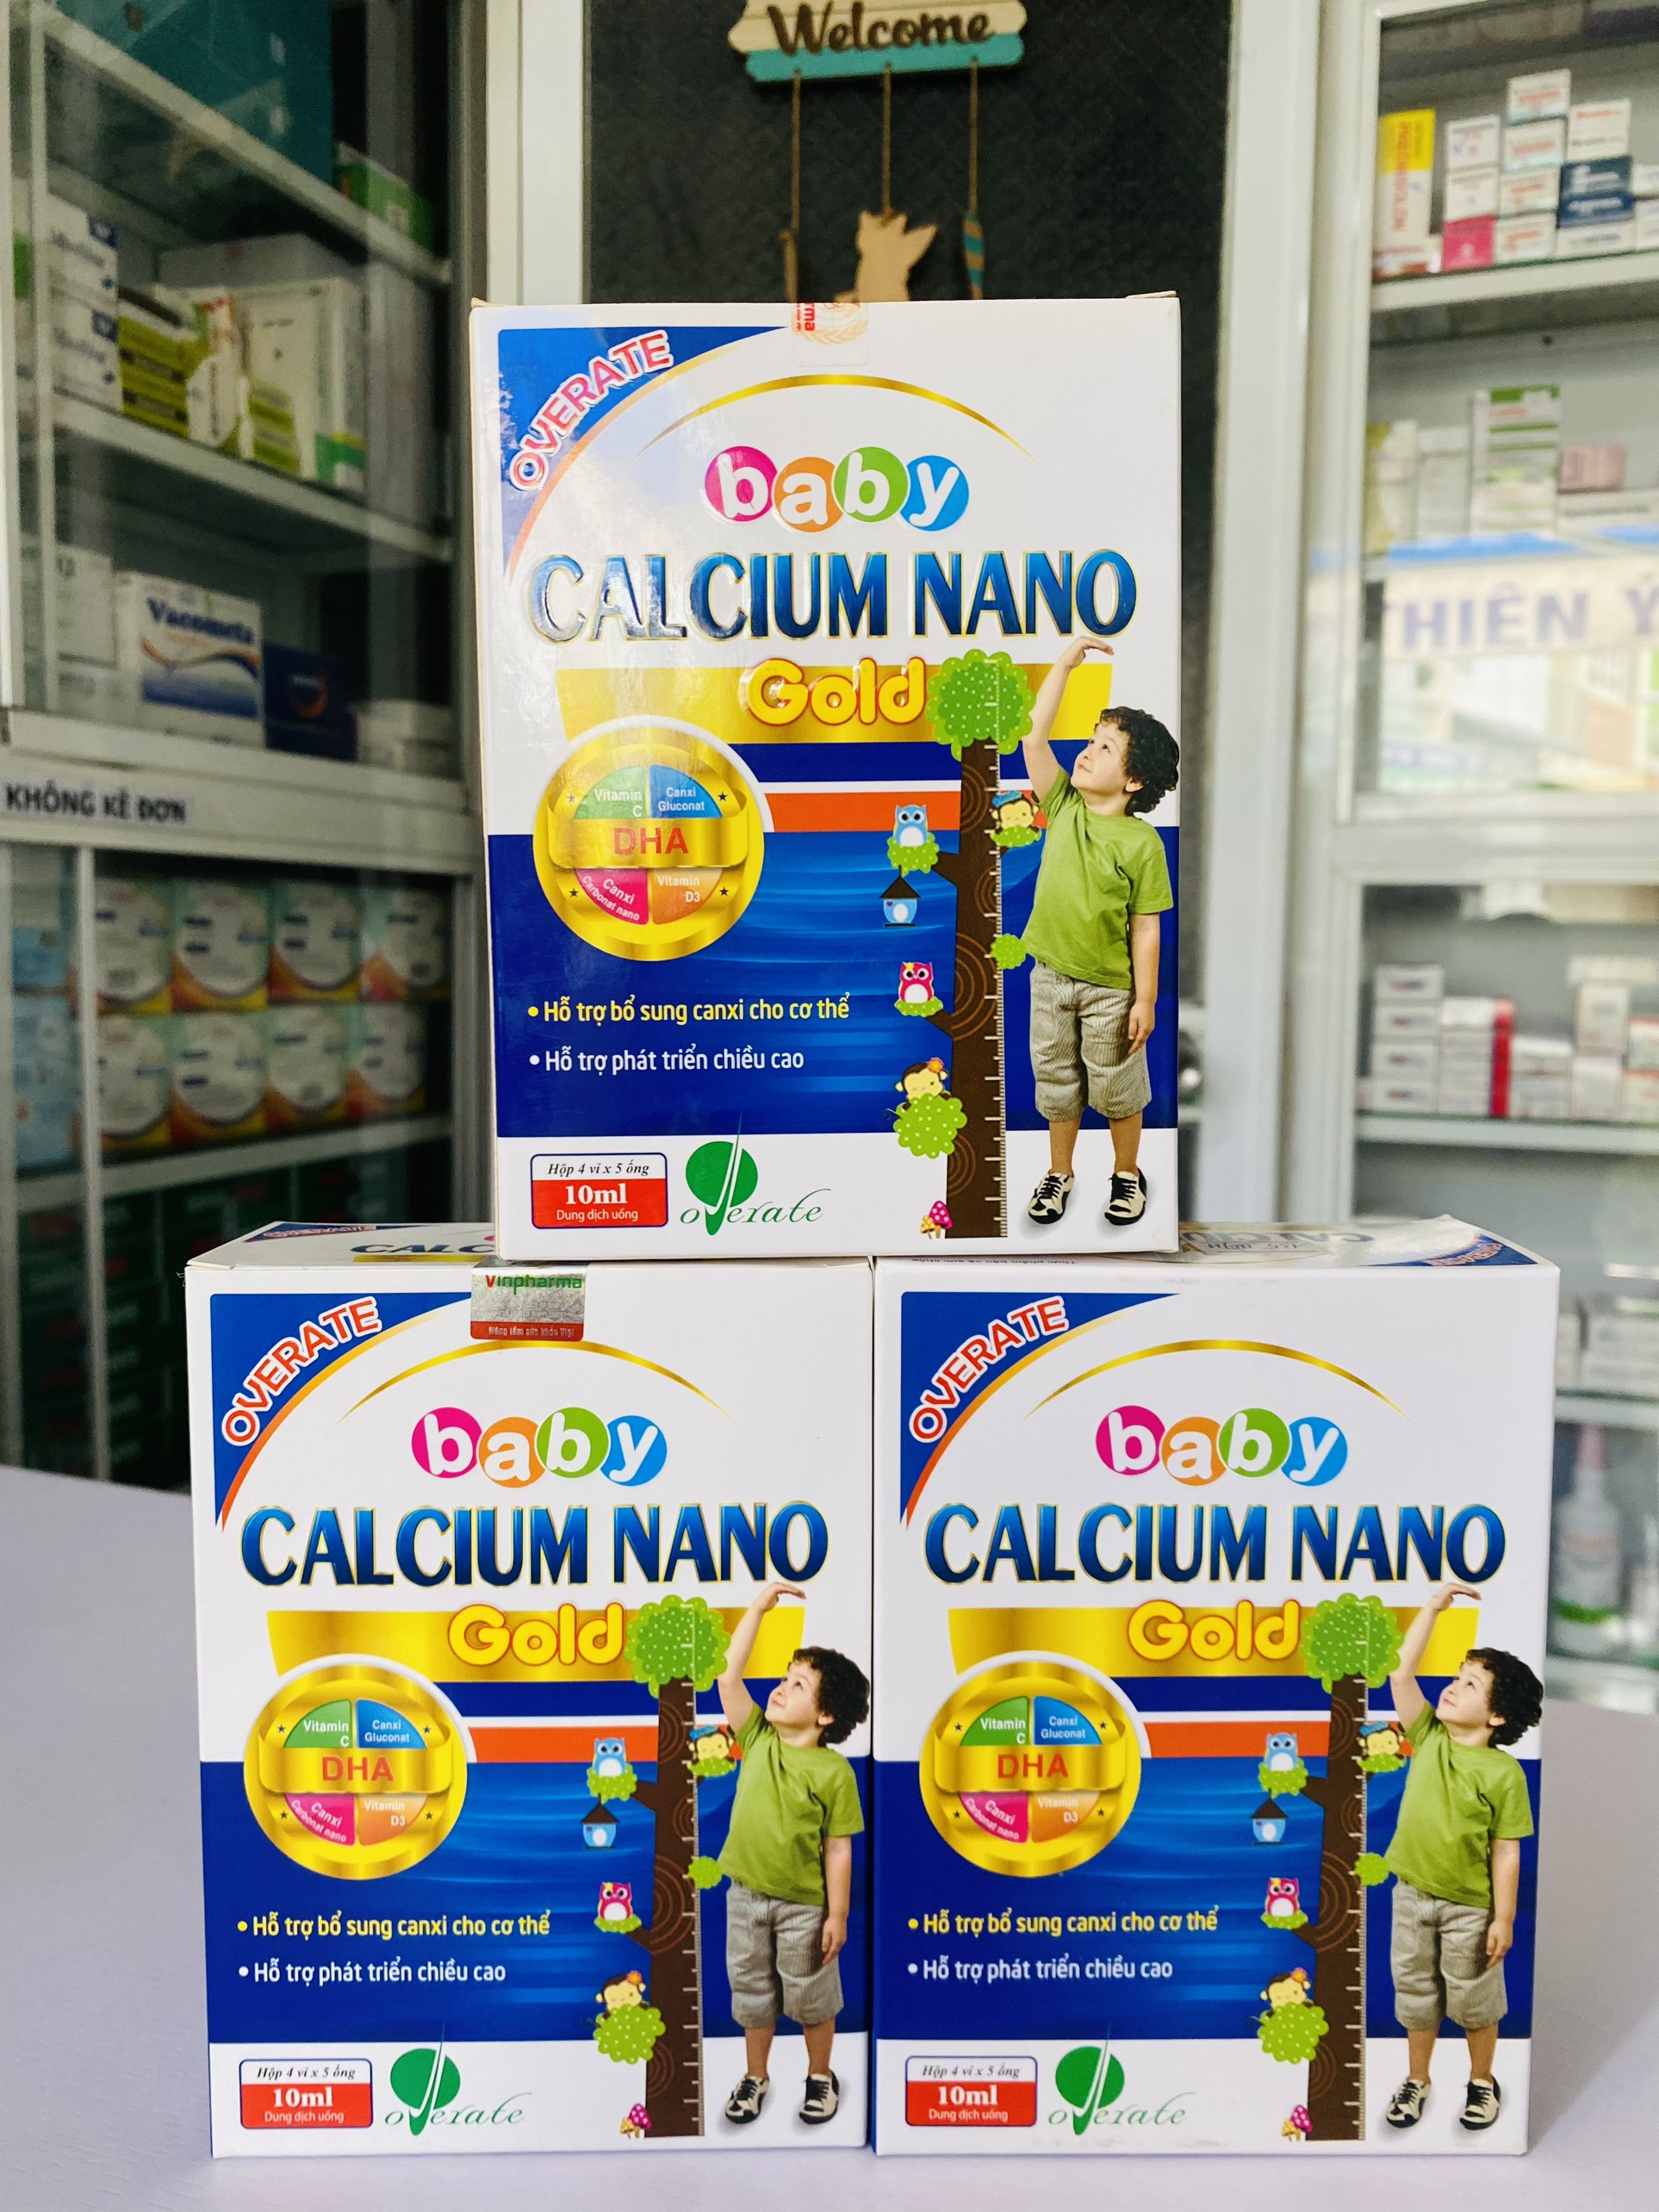 Overate Baby Calcium Nano Gold hỗ trợ bổ sung canxi, hỗ trợ phát triển chiều cao